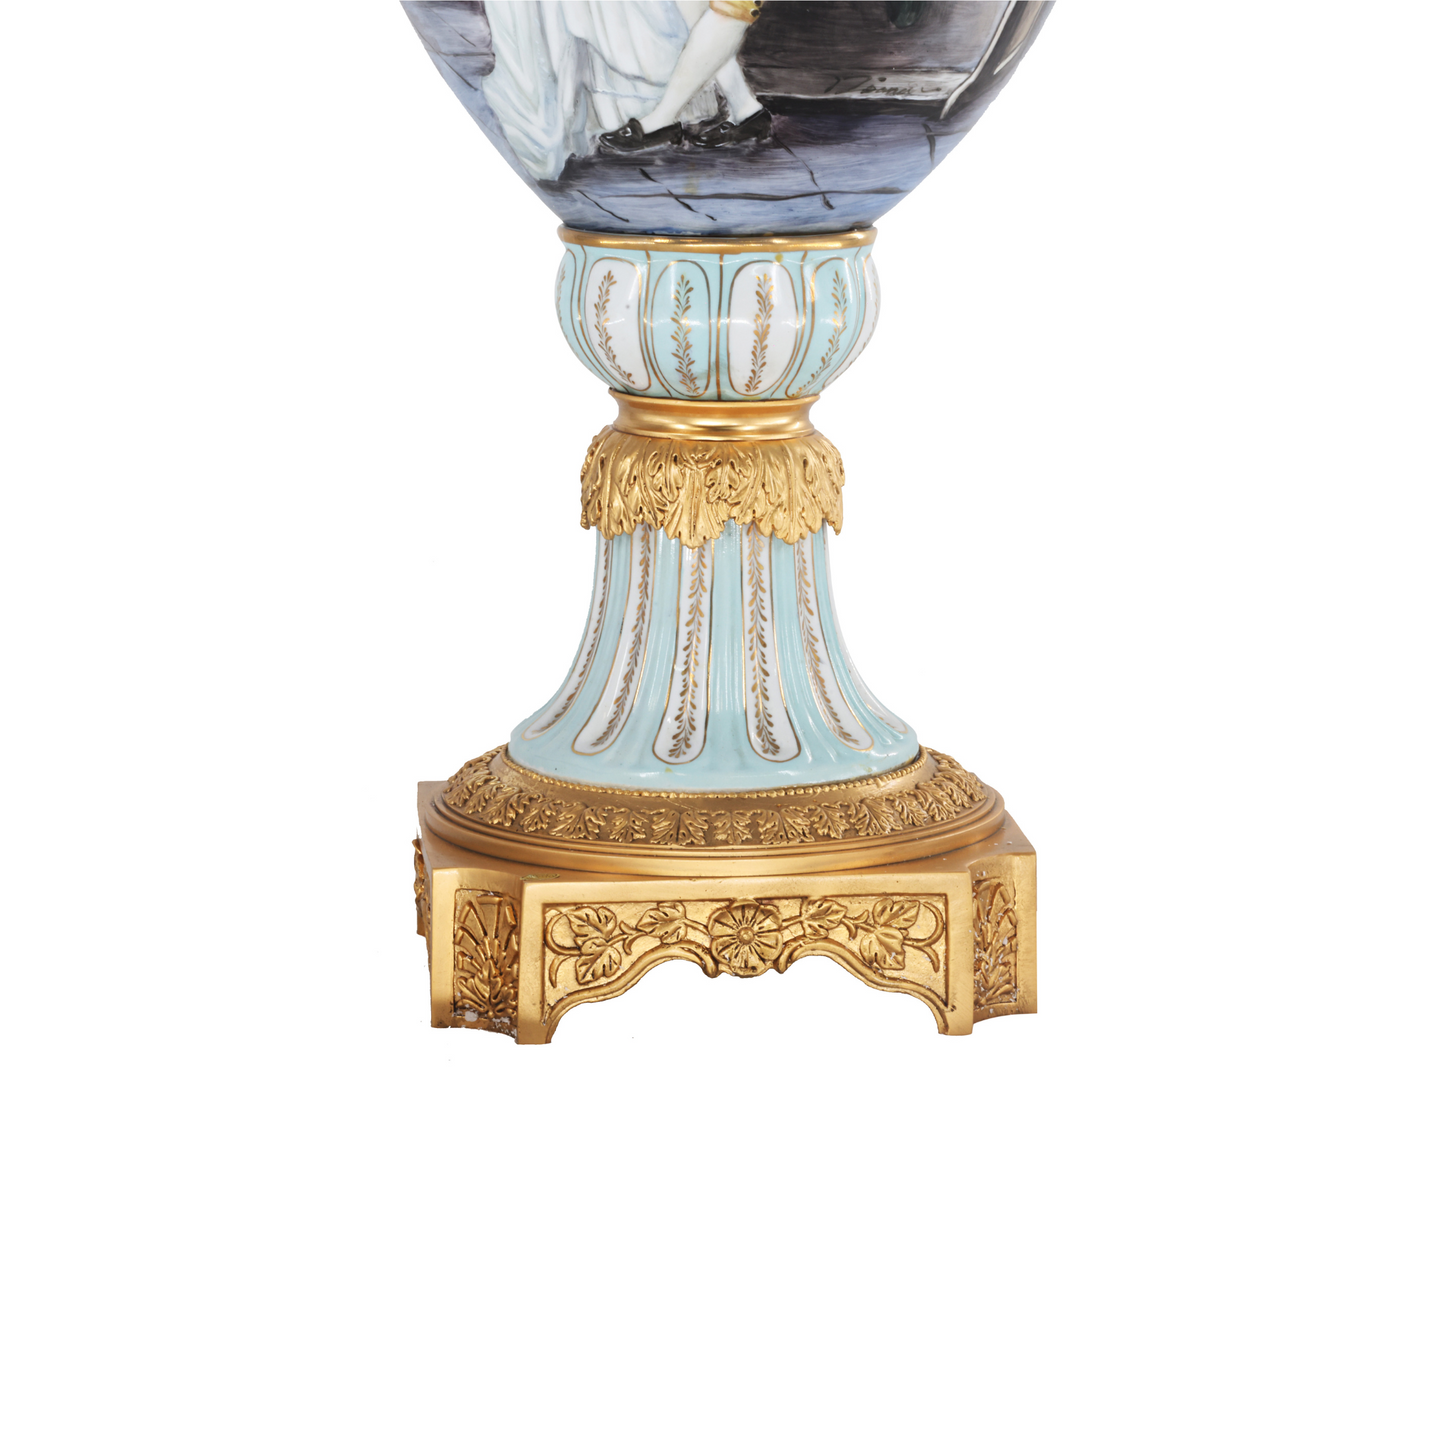 Gorgeous Rococo Style Hand-painted Porcelain Vase